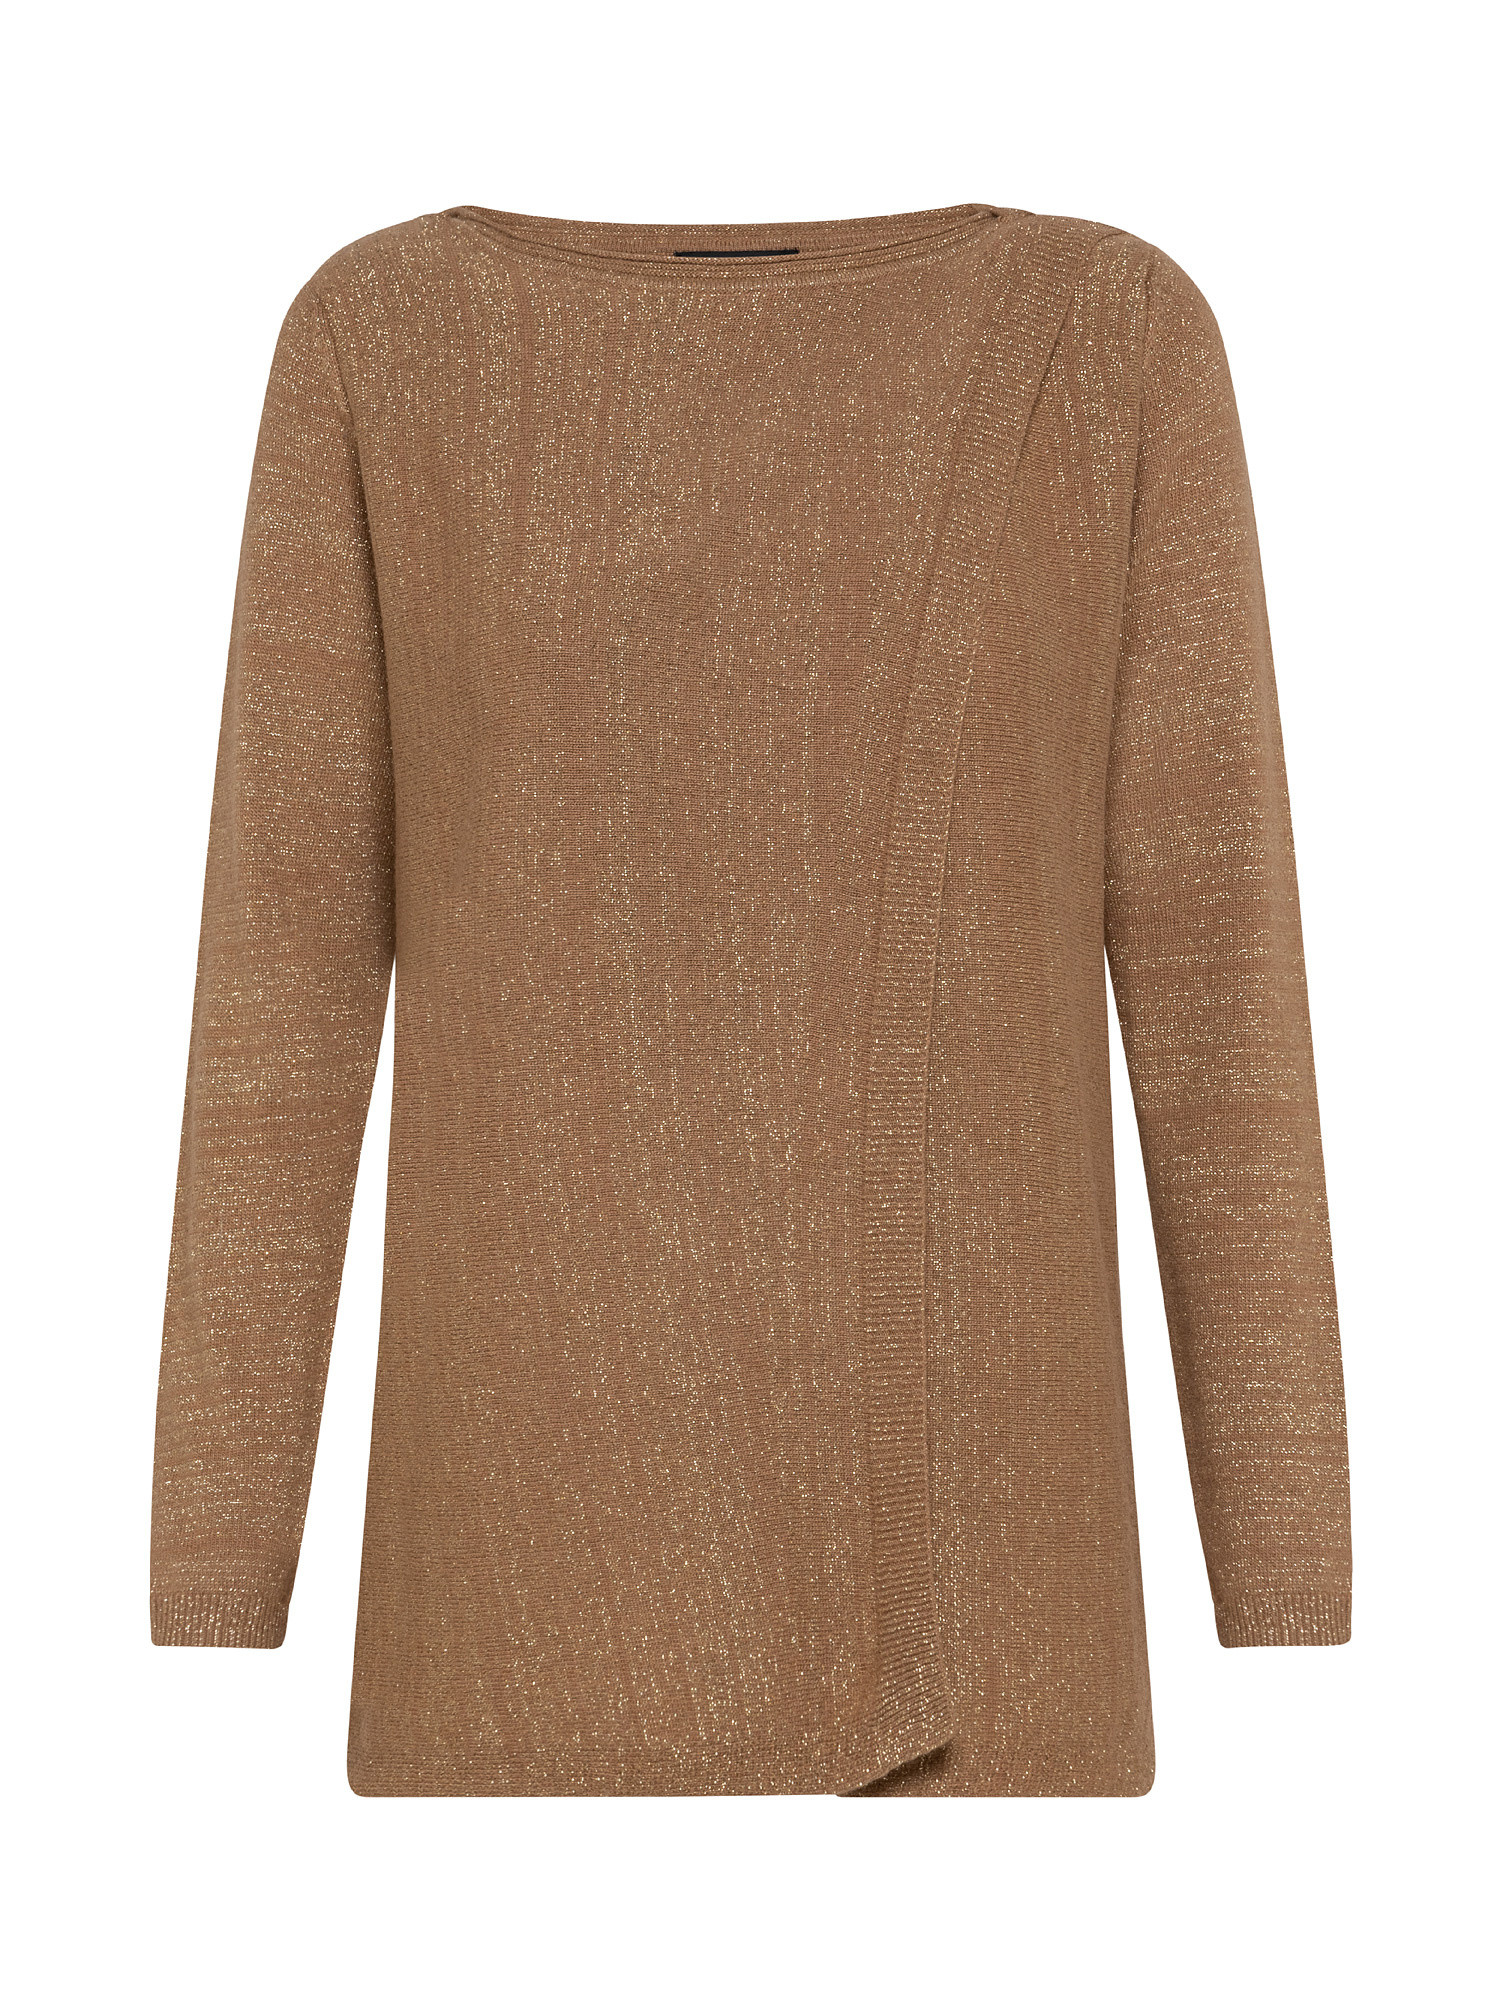 Pullover con motivo, Beige, large image number 0